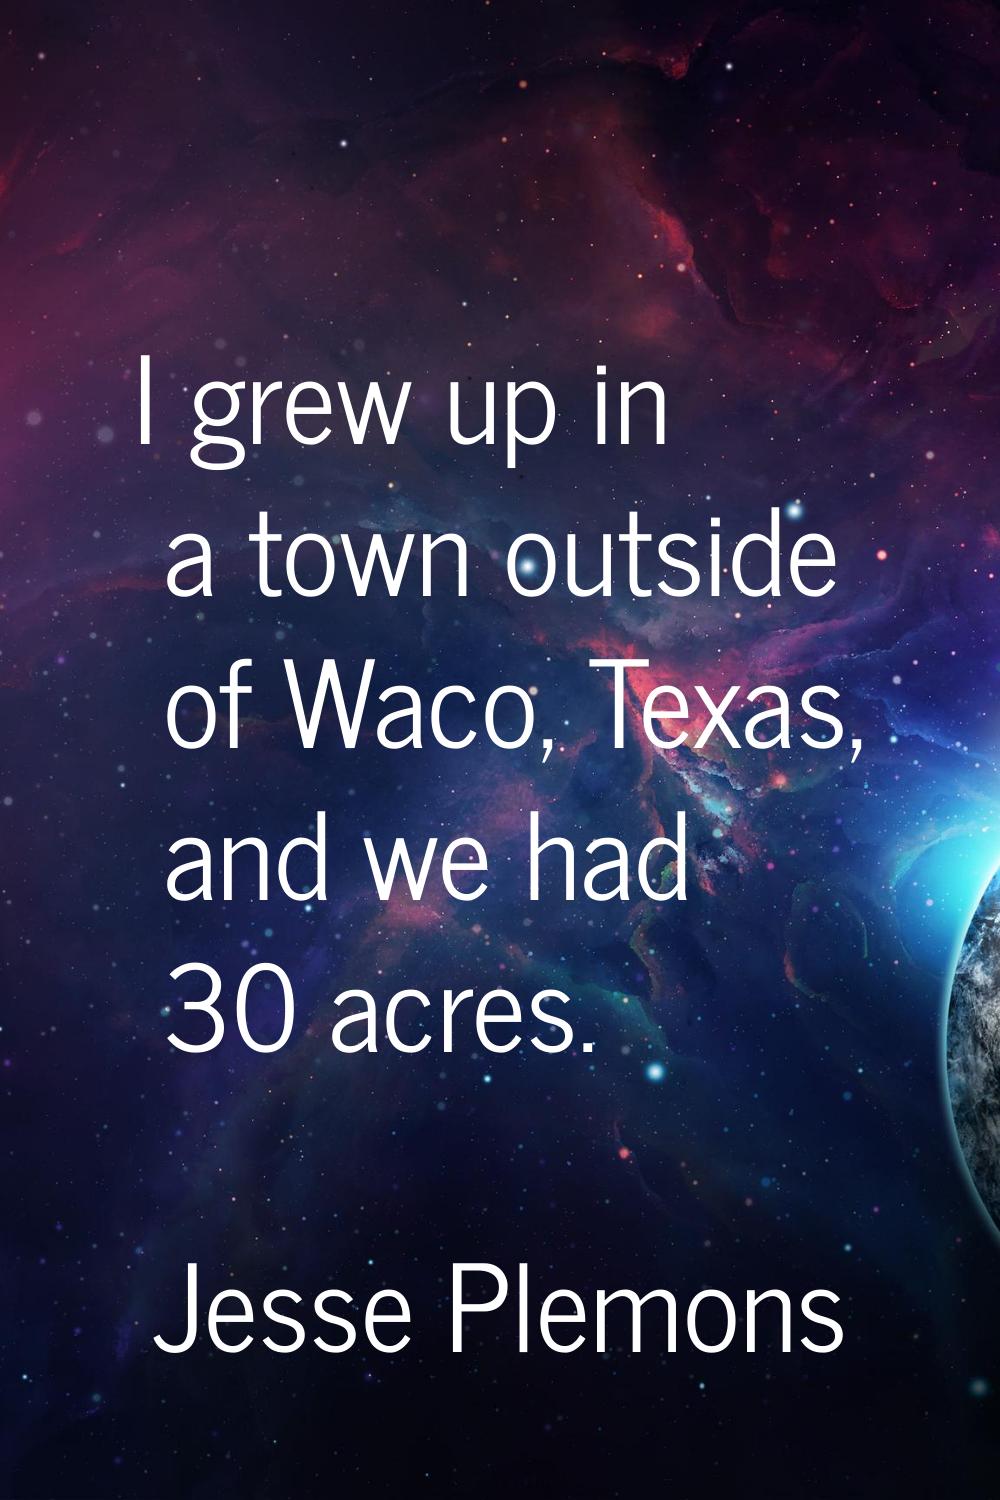 I grew up in a town outside of Waco, Texas, and we had 30 acres.